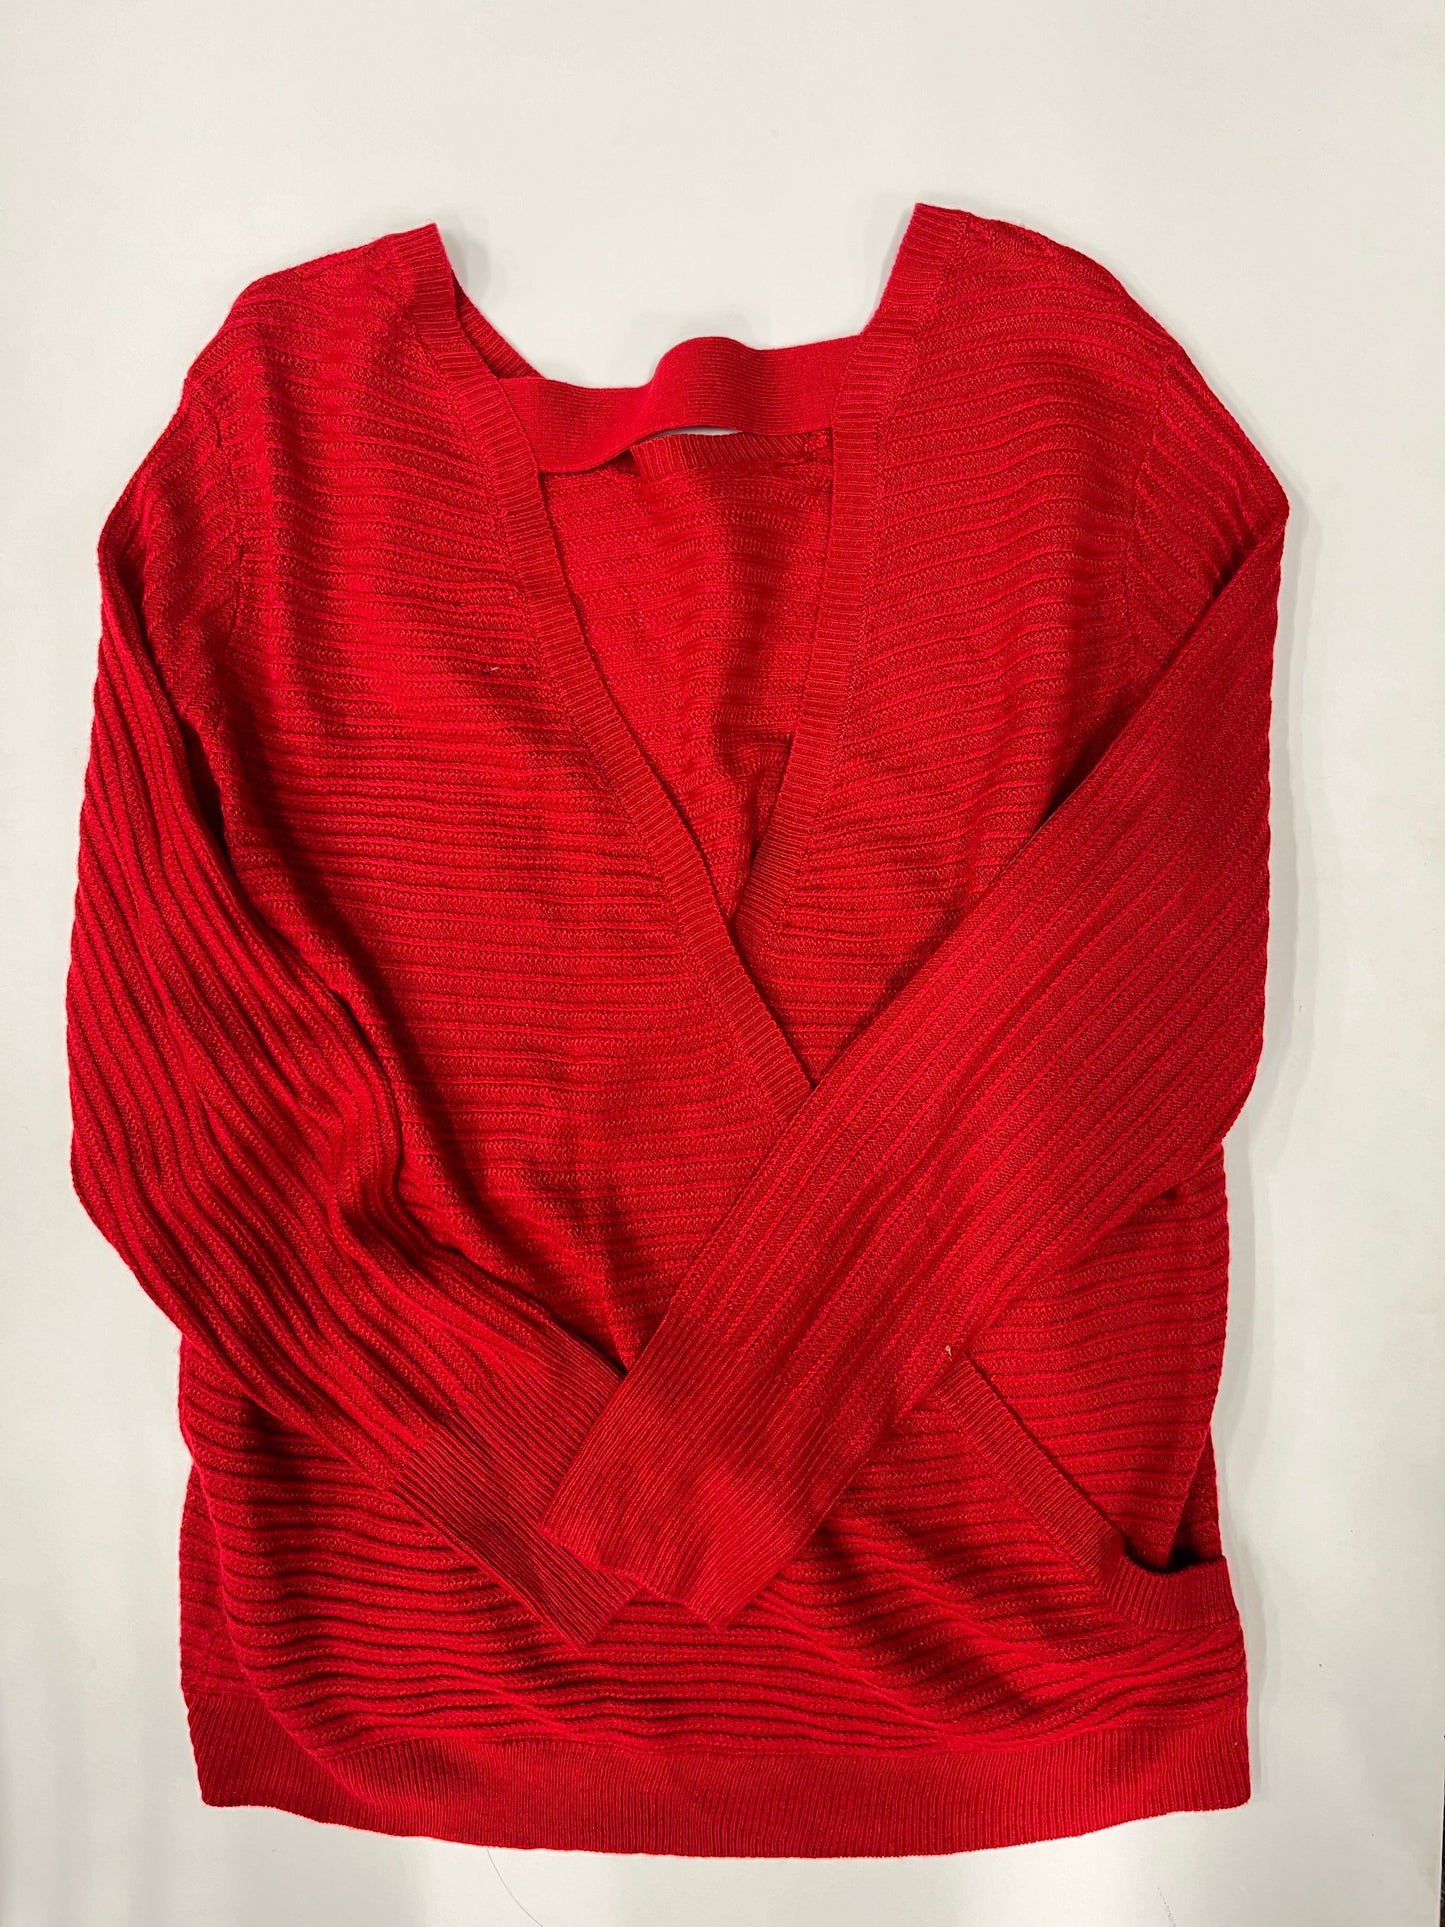 Sweater By Soho Design Group NWT Size: Xs